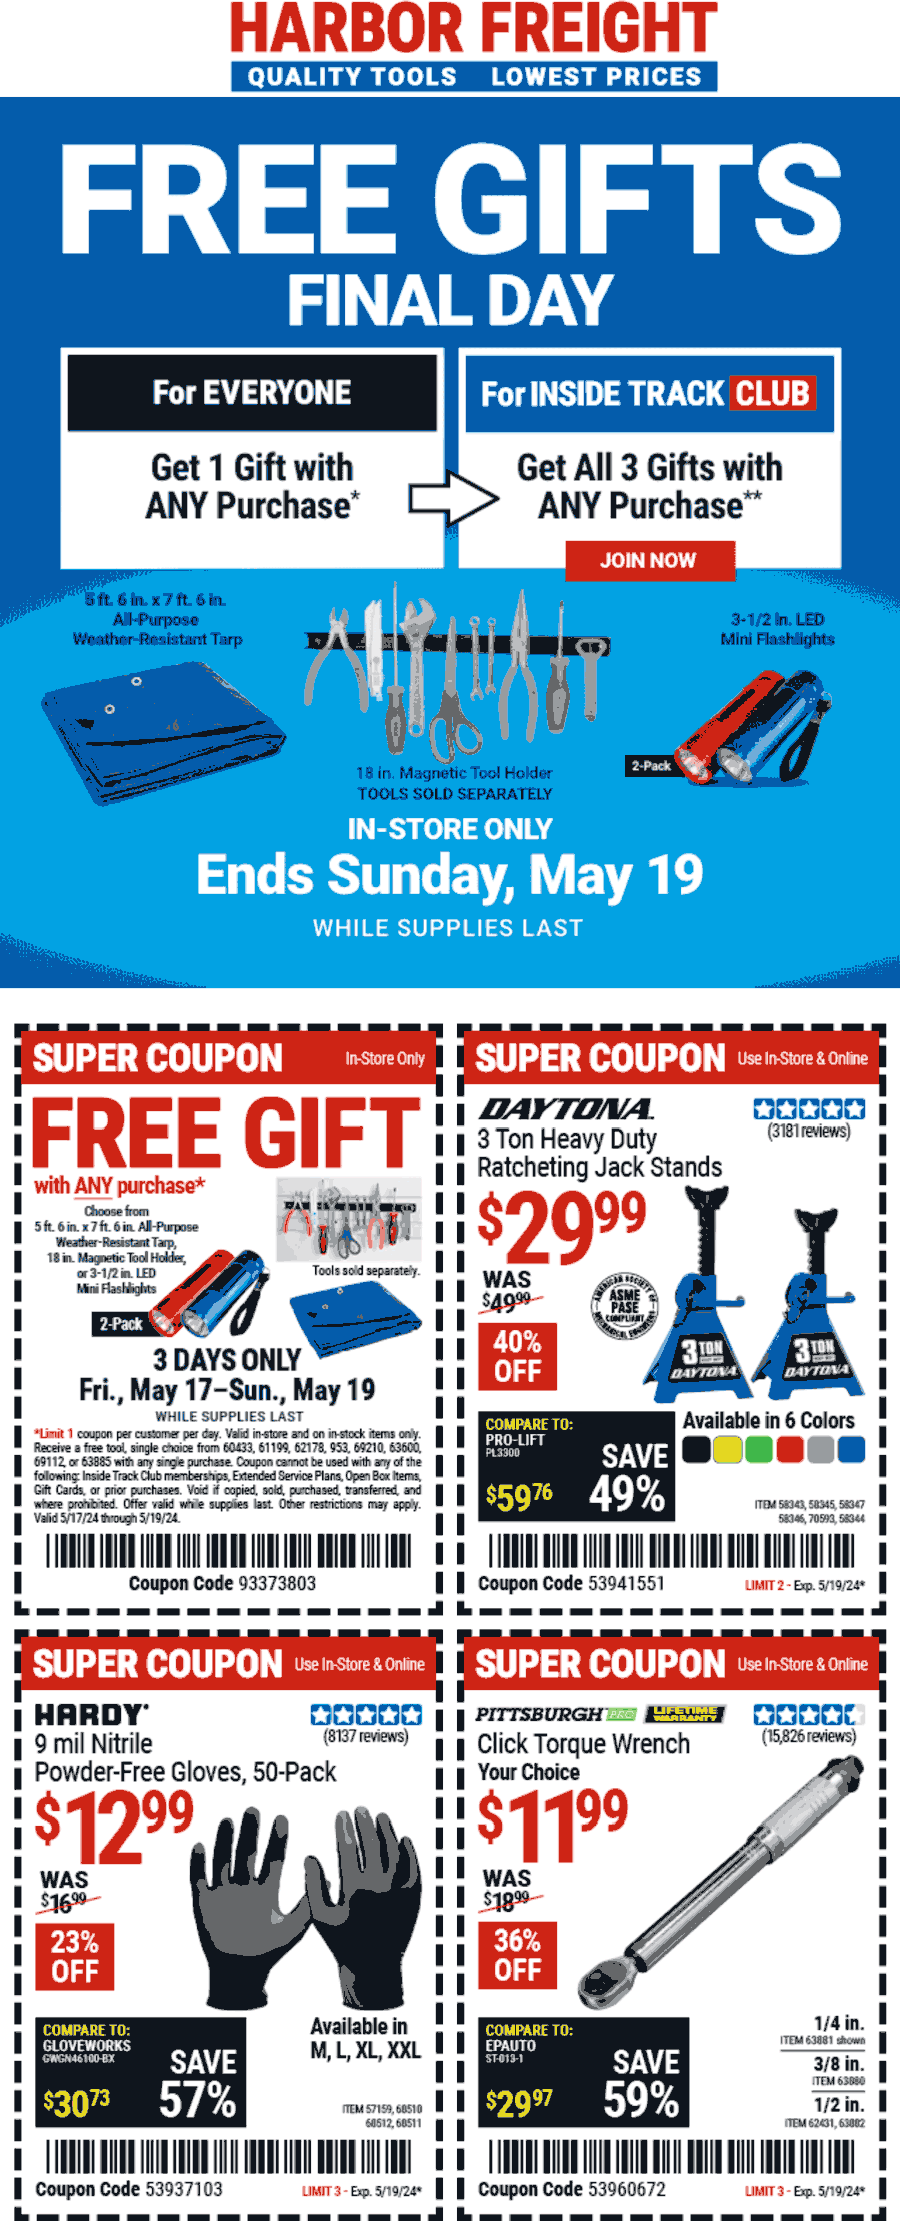 Harbor Freight stores Coupon  Free tool holder, tarp or flashlights with any purchase today at Harbor Freight Tools #harborfreight 